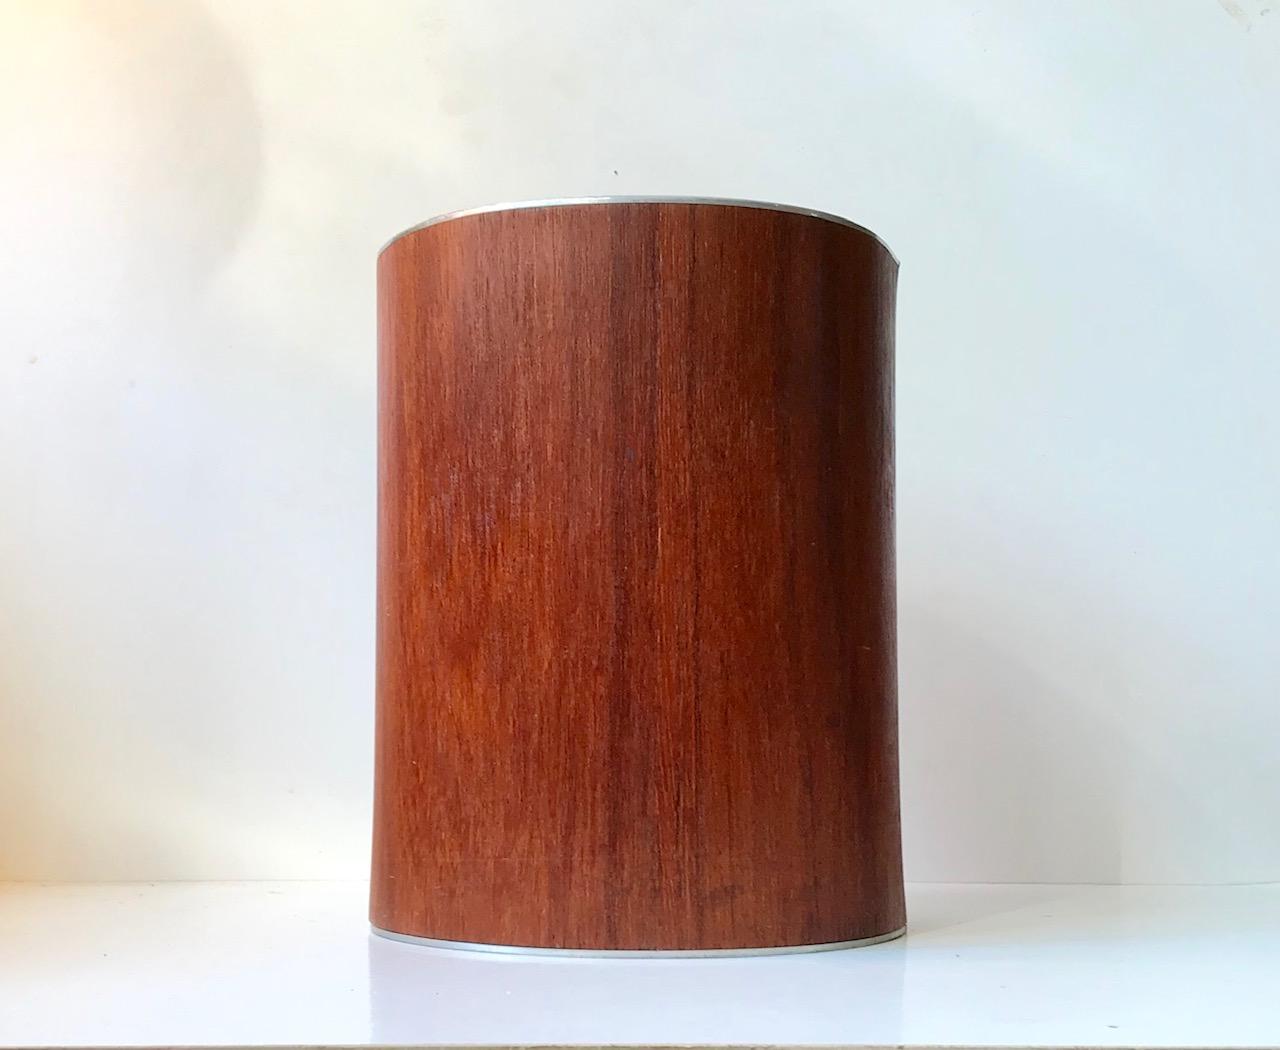 Mid-Century Modern cylindrical teak waste basket designed by Martin Åberg and manufactured by the Swedish company Servex. This particular model with aluminum top and bottom edges was commissioned by Emmery Wood Craft of Denmark during the 1960s.